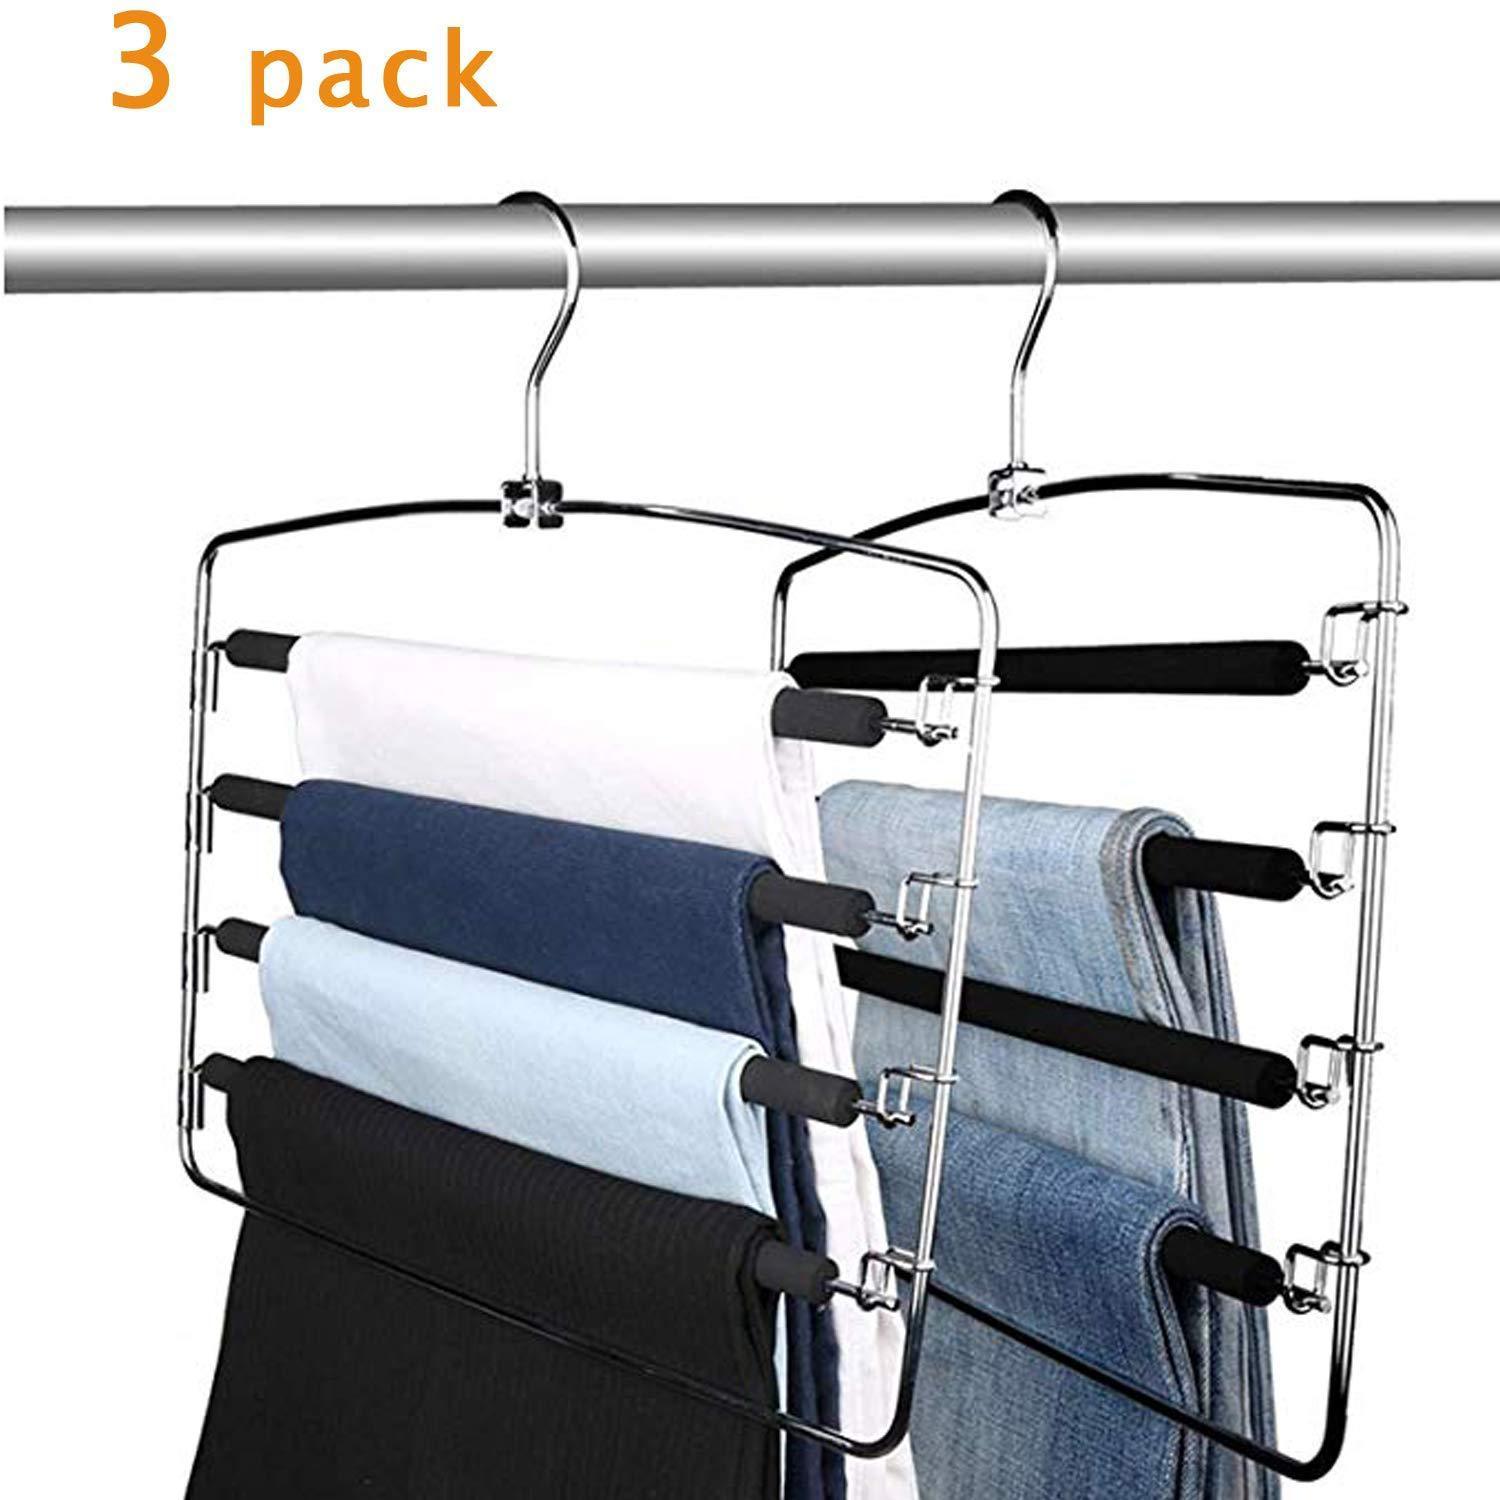 Cheap lucky life clothes pants hangers 3 pack pant slack hangers space saving non slip stainless steel closet organizer with foam padded swing arm for pants jeans scarf 1